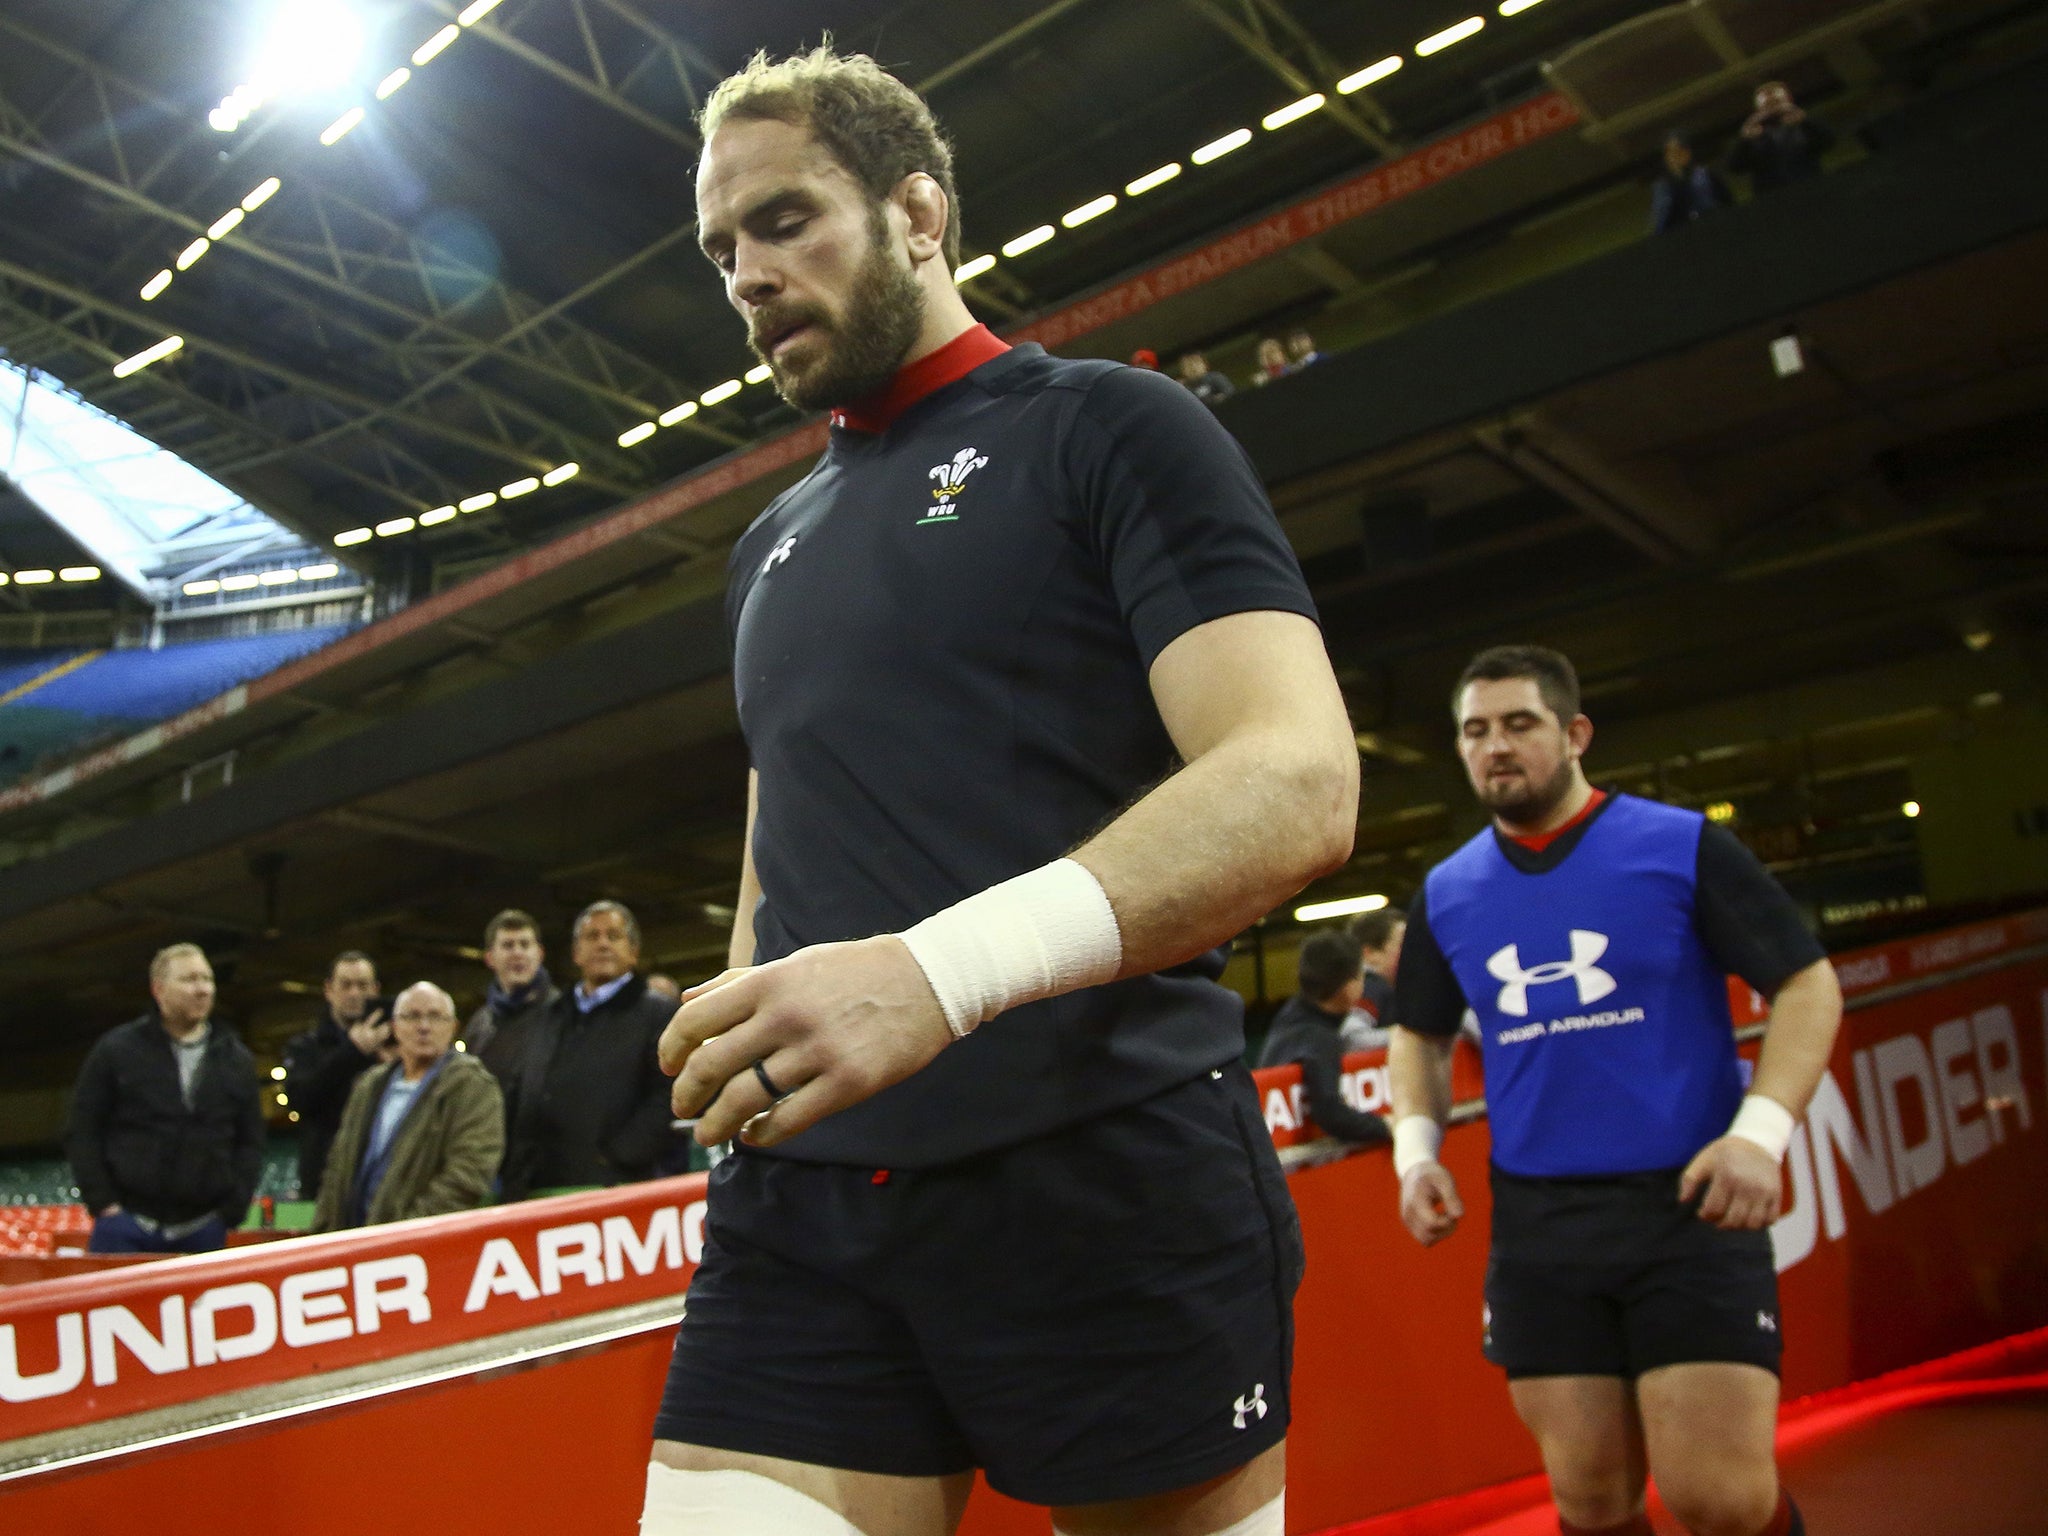 Alun Wyn Jones is one of Wales's last remaining Lions players left fit after a gruelling 12 months